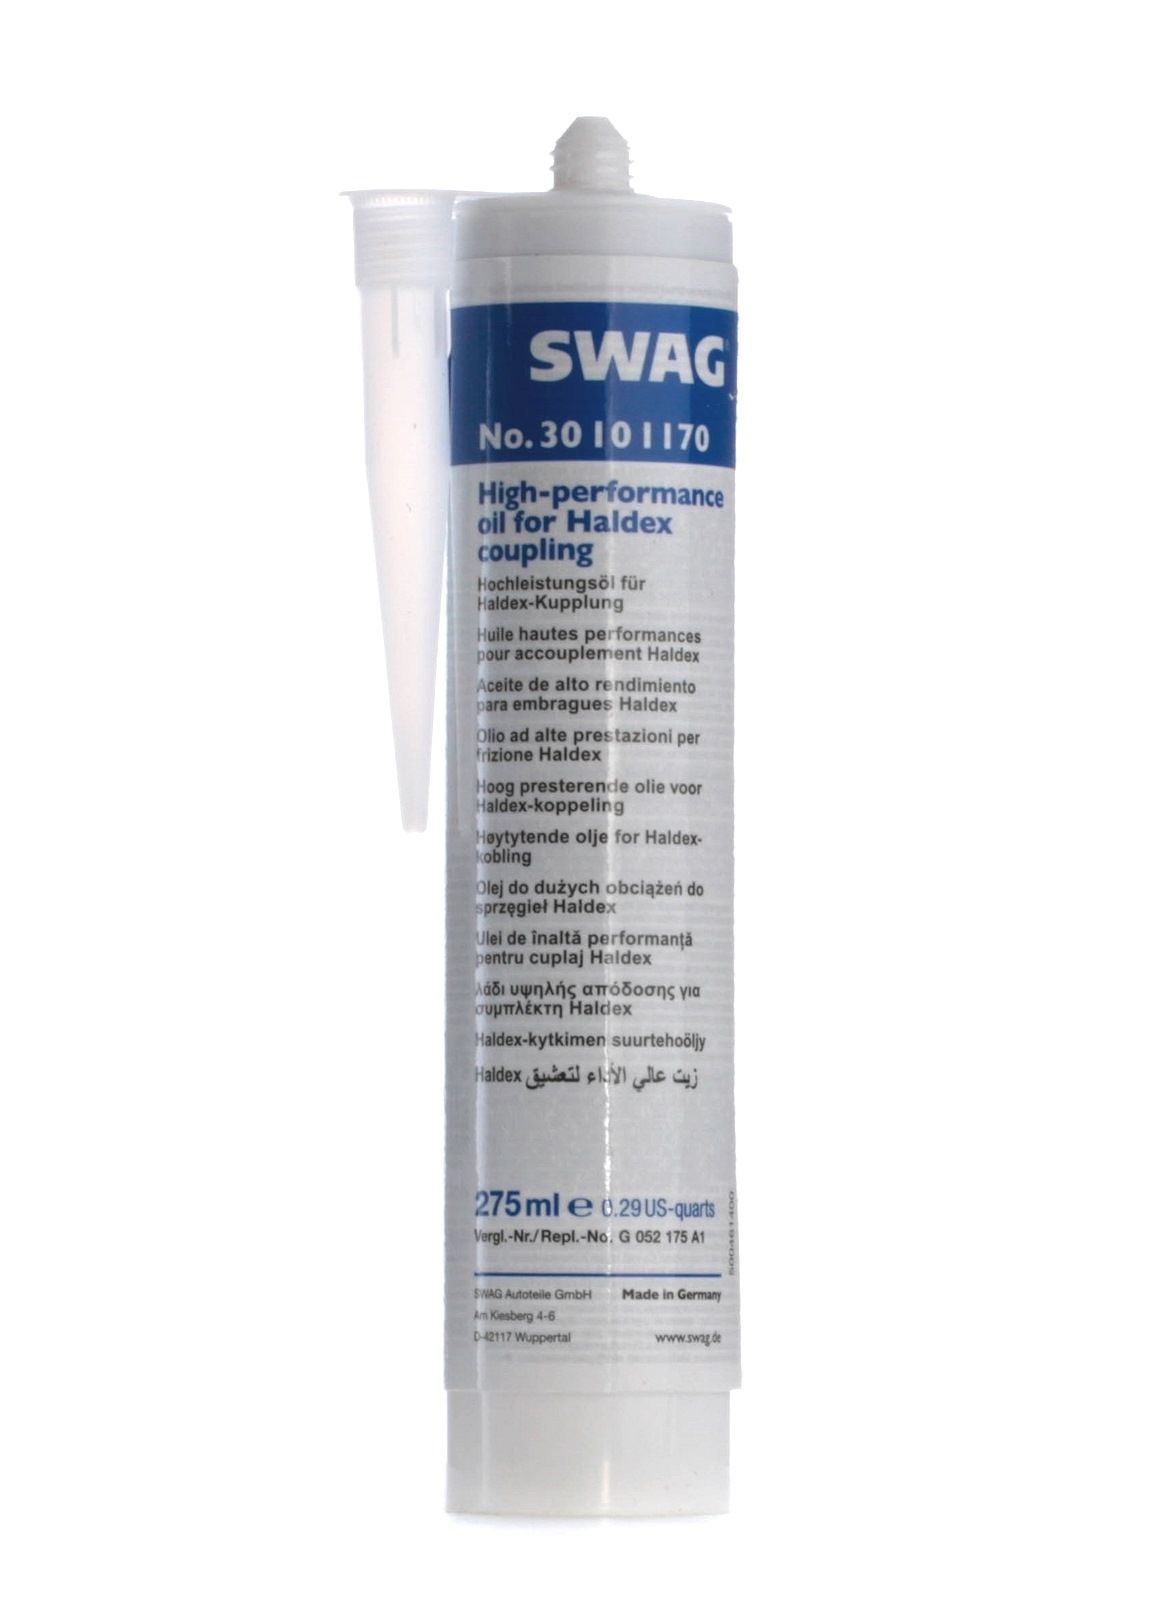 SWAG 30 10 1170 Oil, Haldex coupling VW experience and price